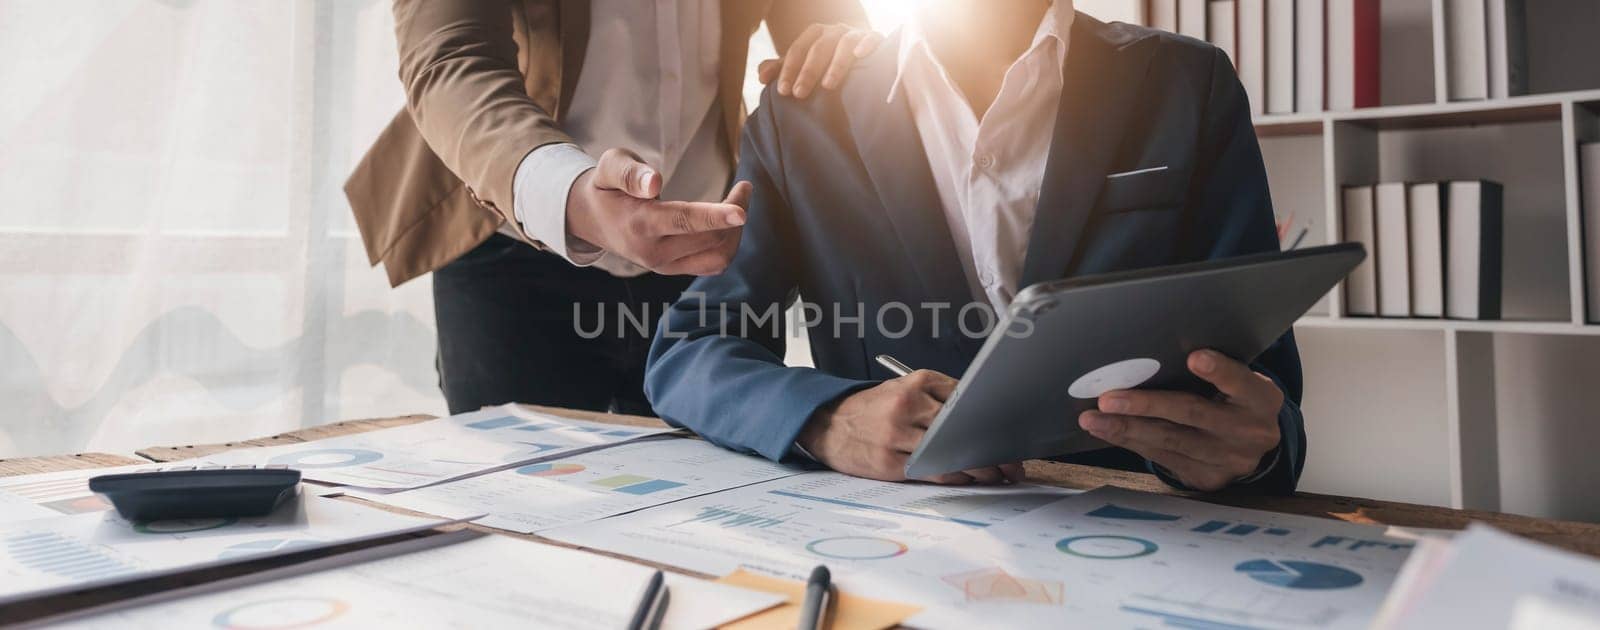 Business People Meeting using laptop computer,calculator,notebook,stock market chart paper for analysis Plans to improve quality next month. Conference Discussion Corporate Concept....